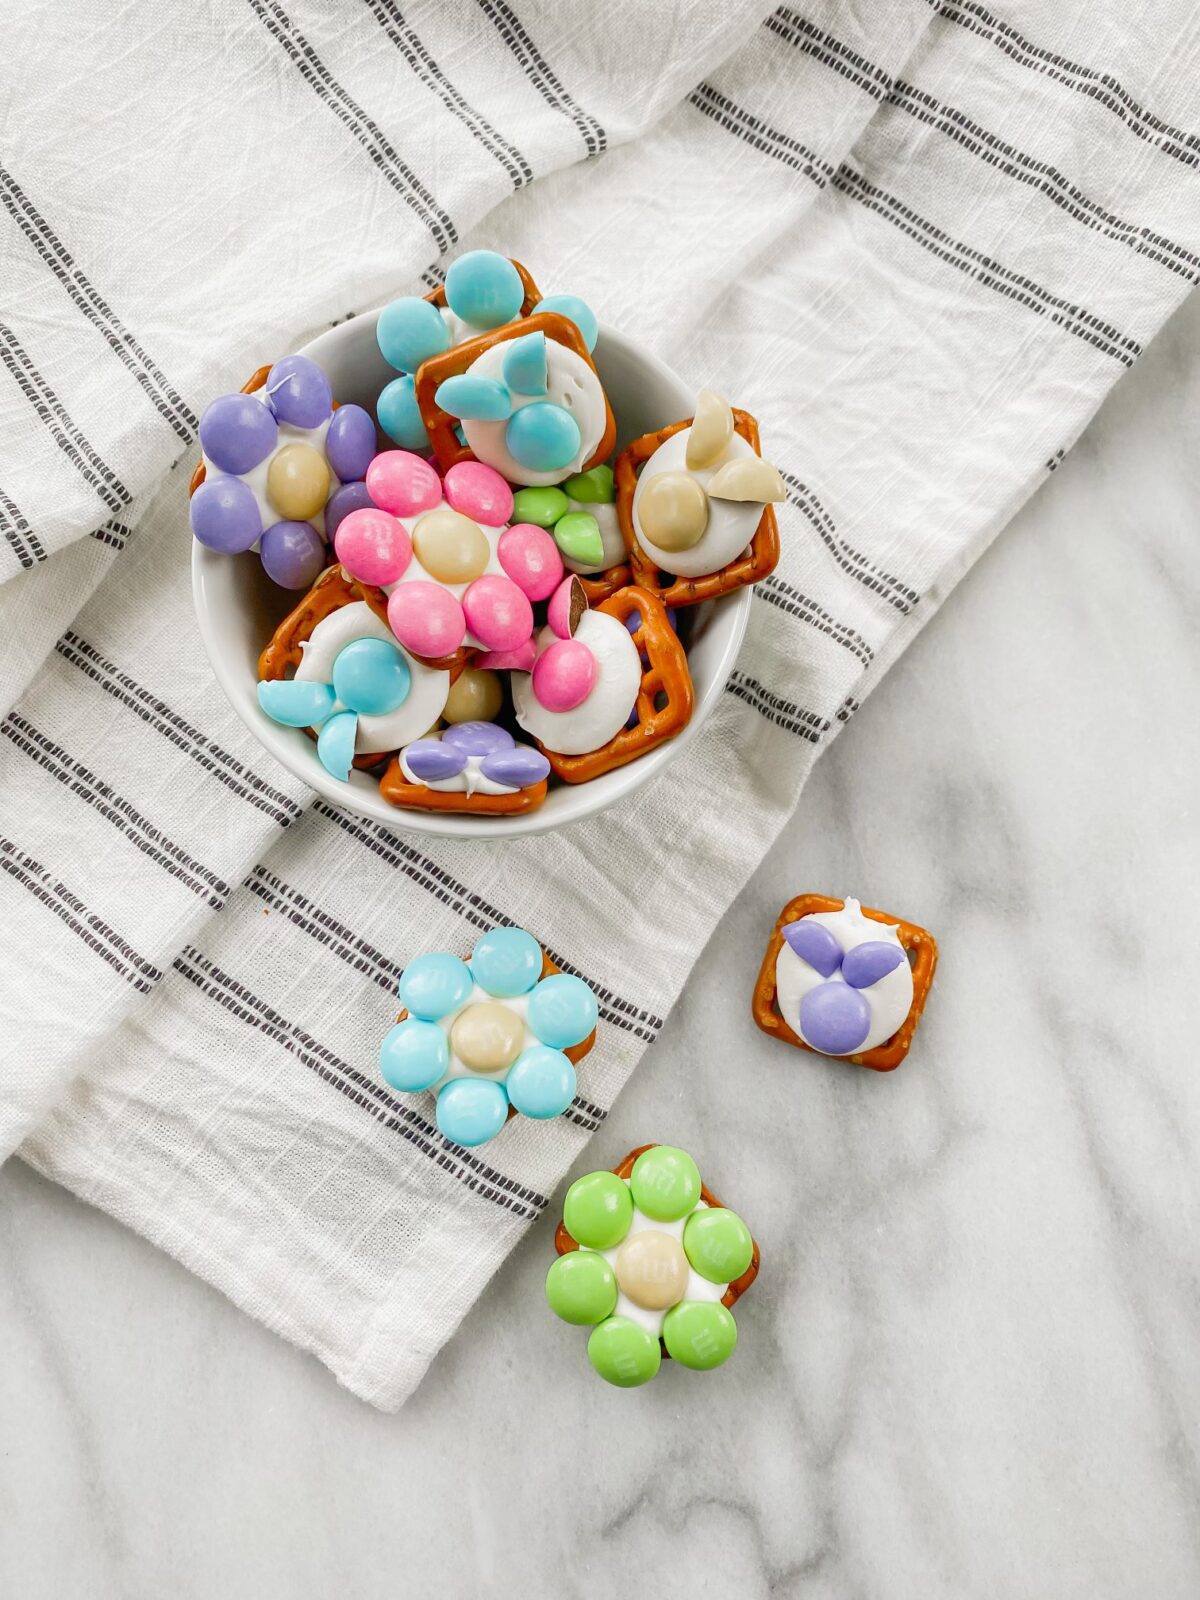 adorable spring treats made from pretzels and M&Ms are perfect for Easter and other spring gatherings
